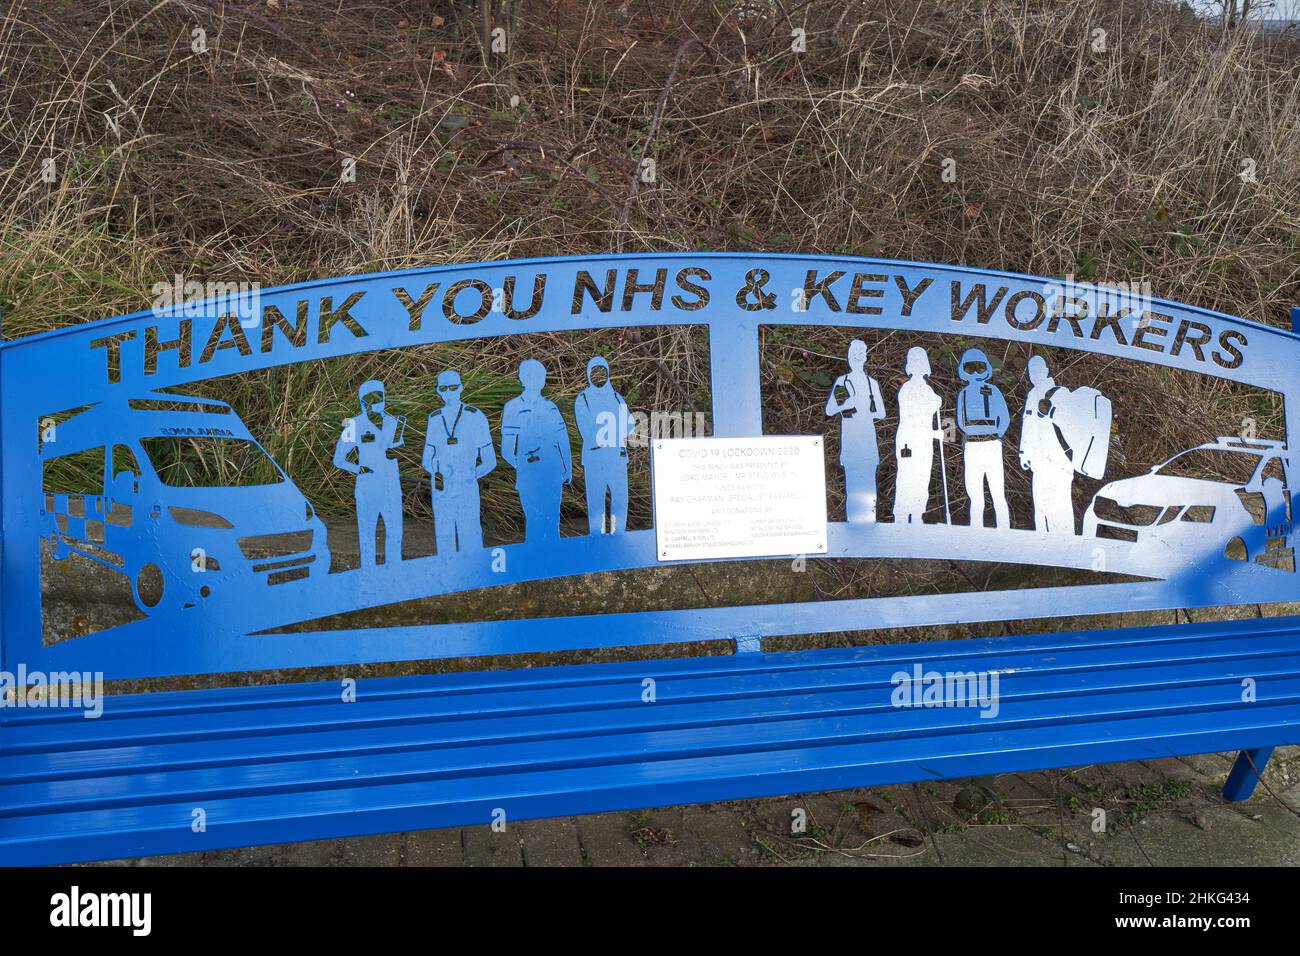 Memorial bench dedicated to NHS keyworkers during the Covid 19 pandemic Stock Photo